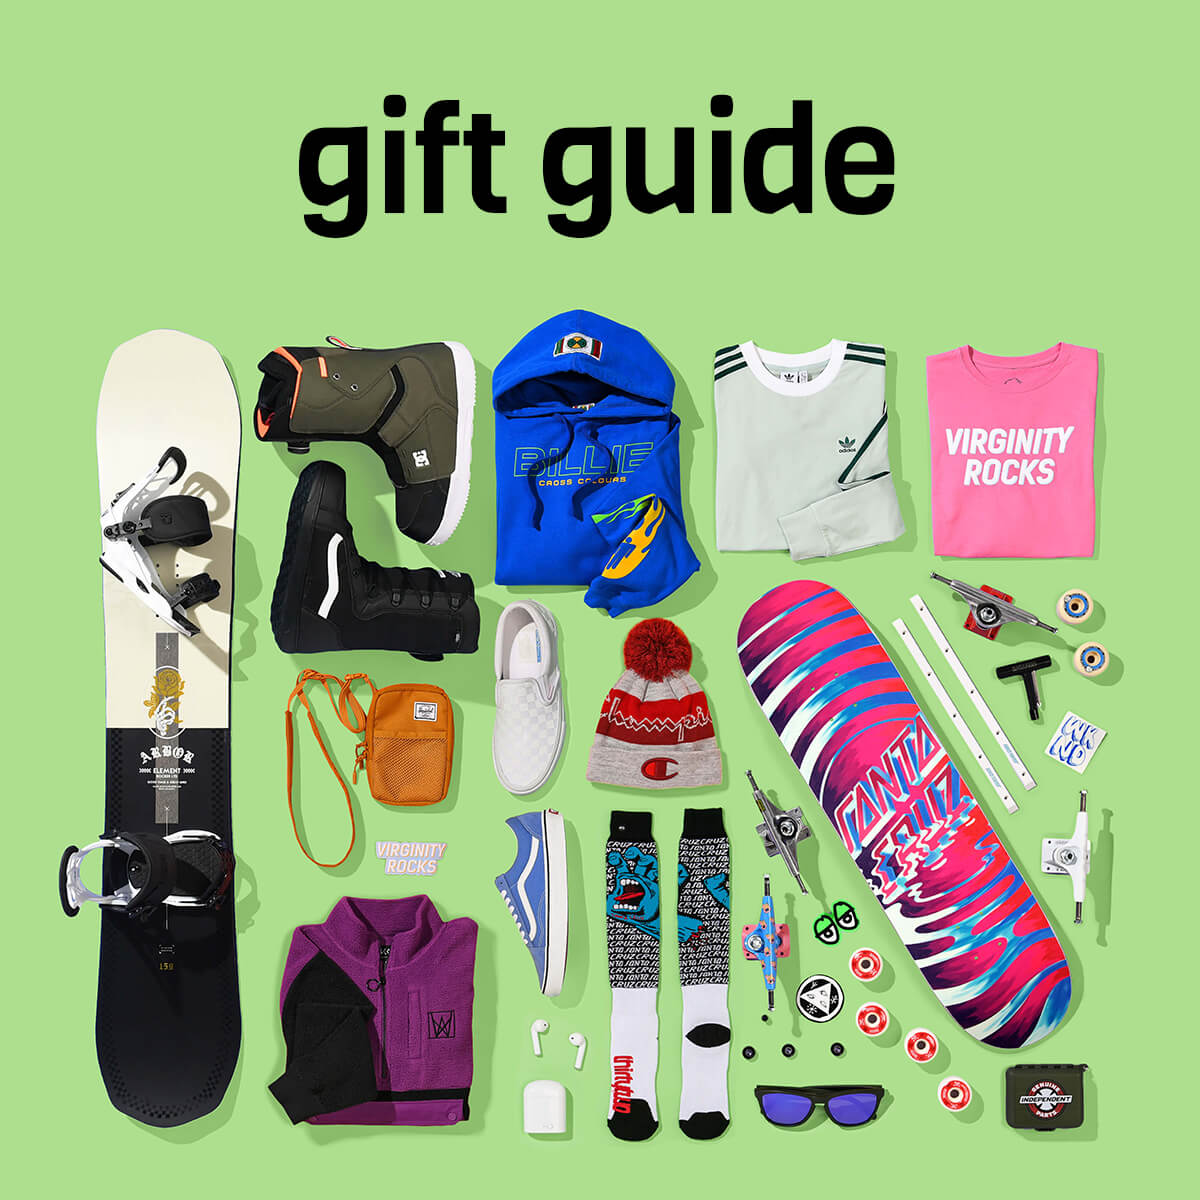 THE HOLIDAY GIFT GUIDE IS HERE - SHOP NOW